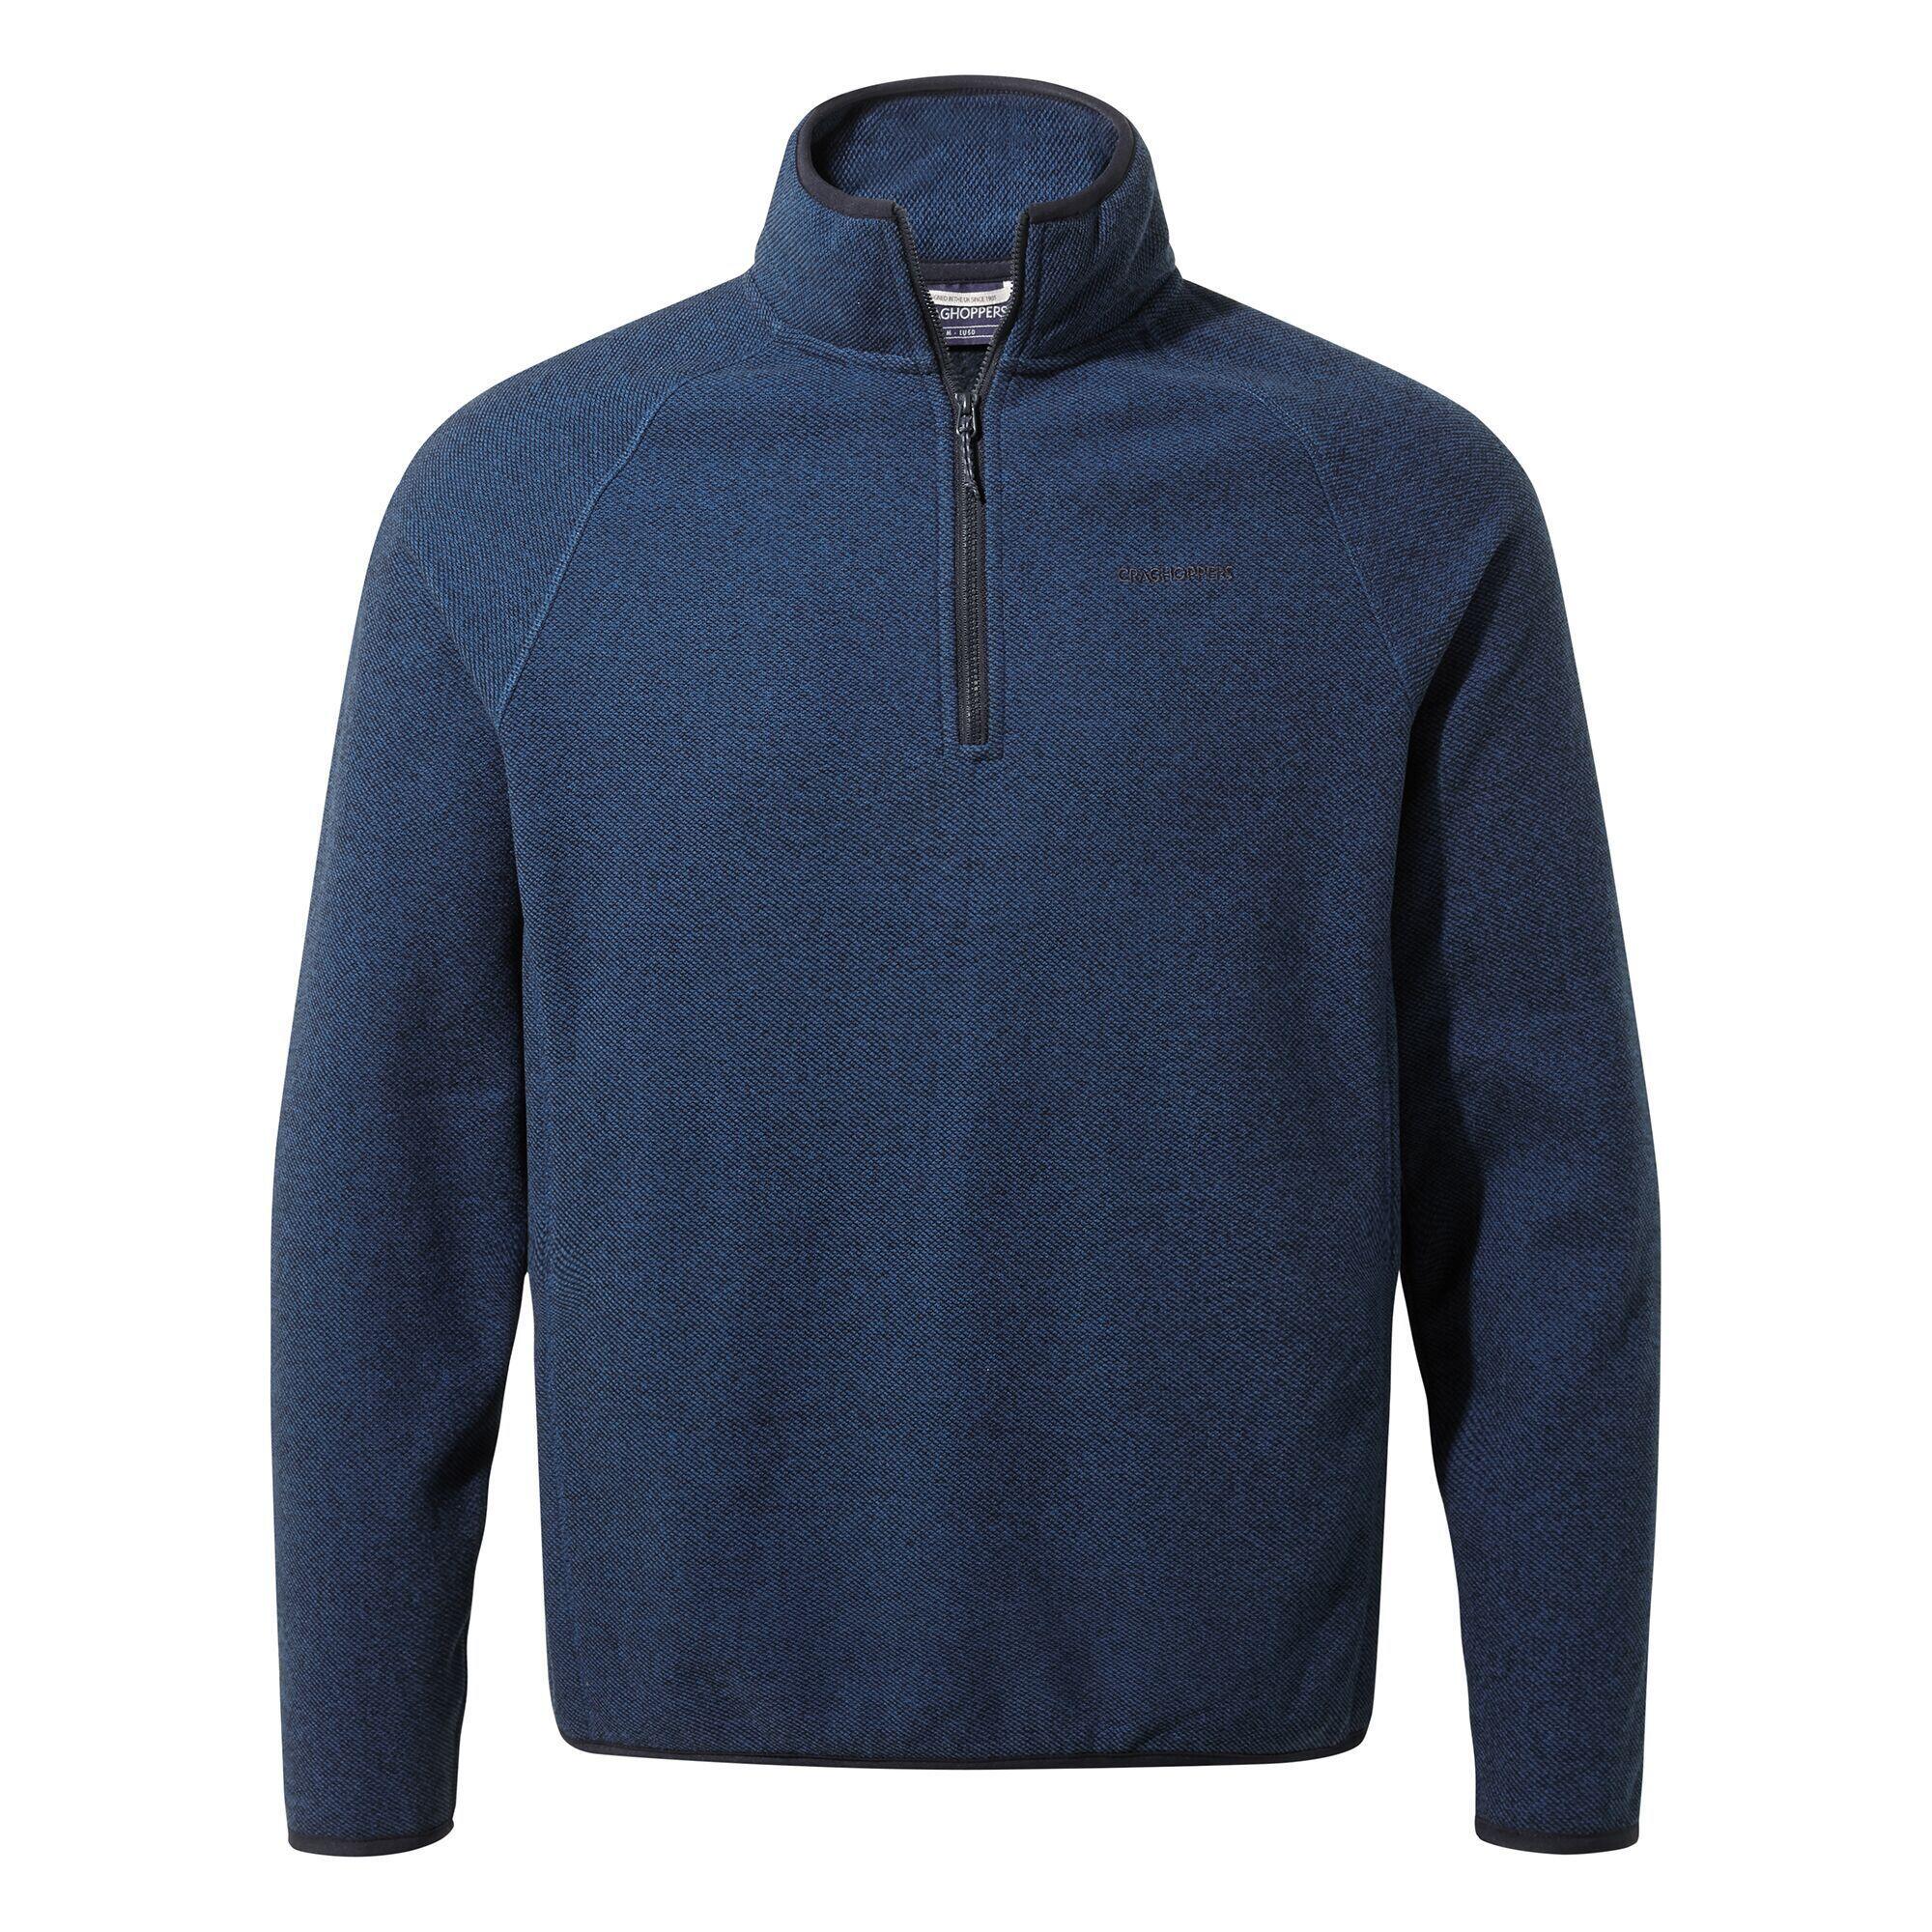 Umbro, England Rugby Full Zip Jacket Adults, Ensign Blue